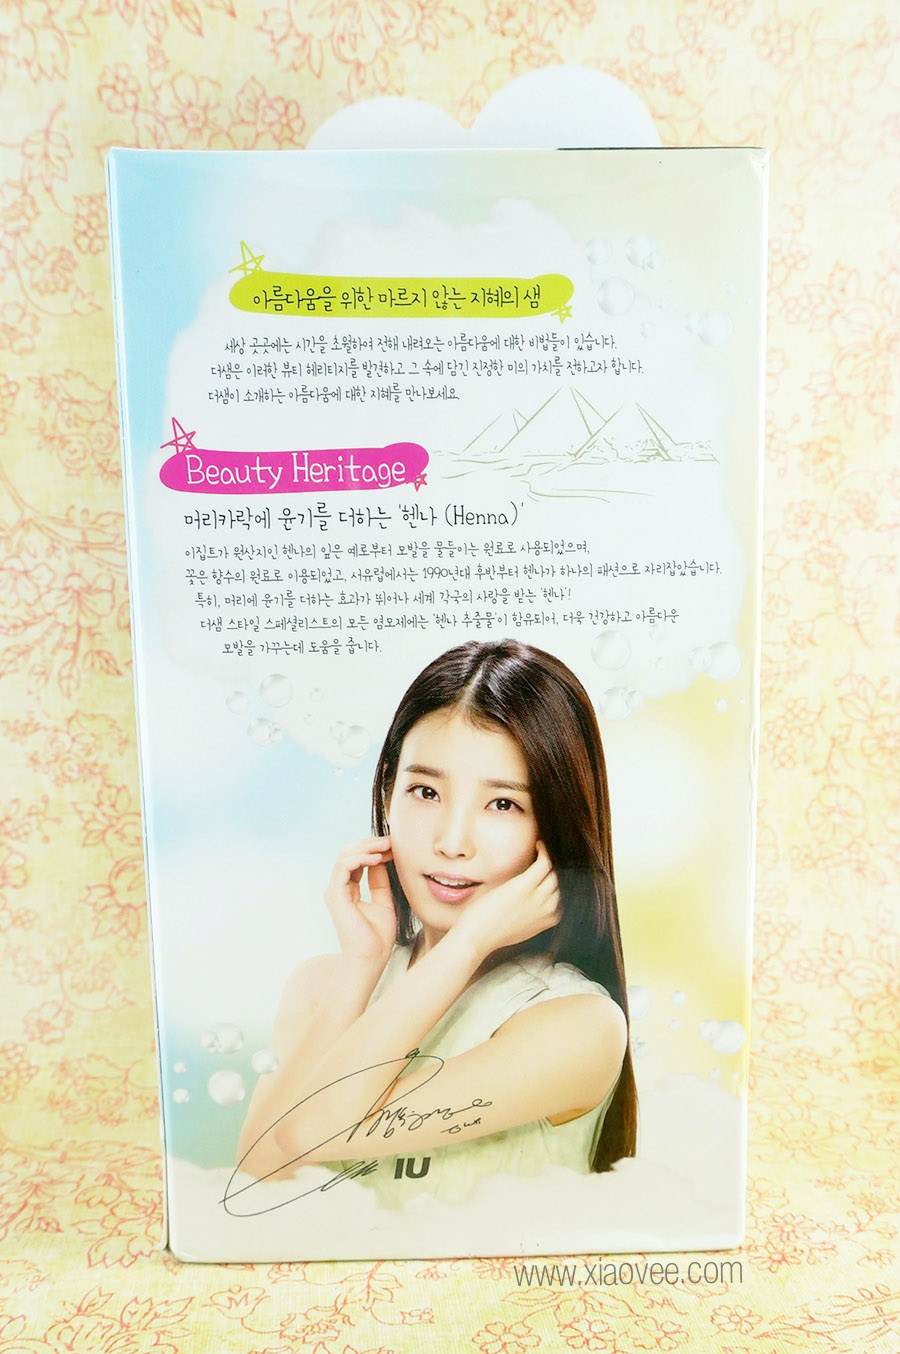 The Saem Style Specialist Easy Bubble Hair Coloring review, the saem hair coloring IU